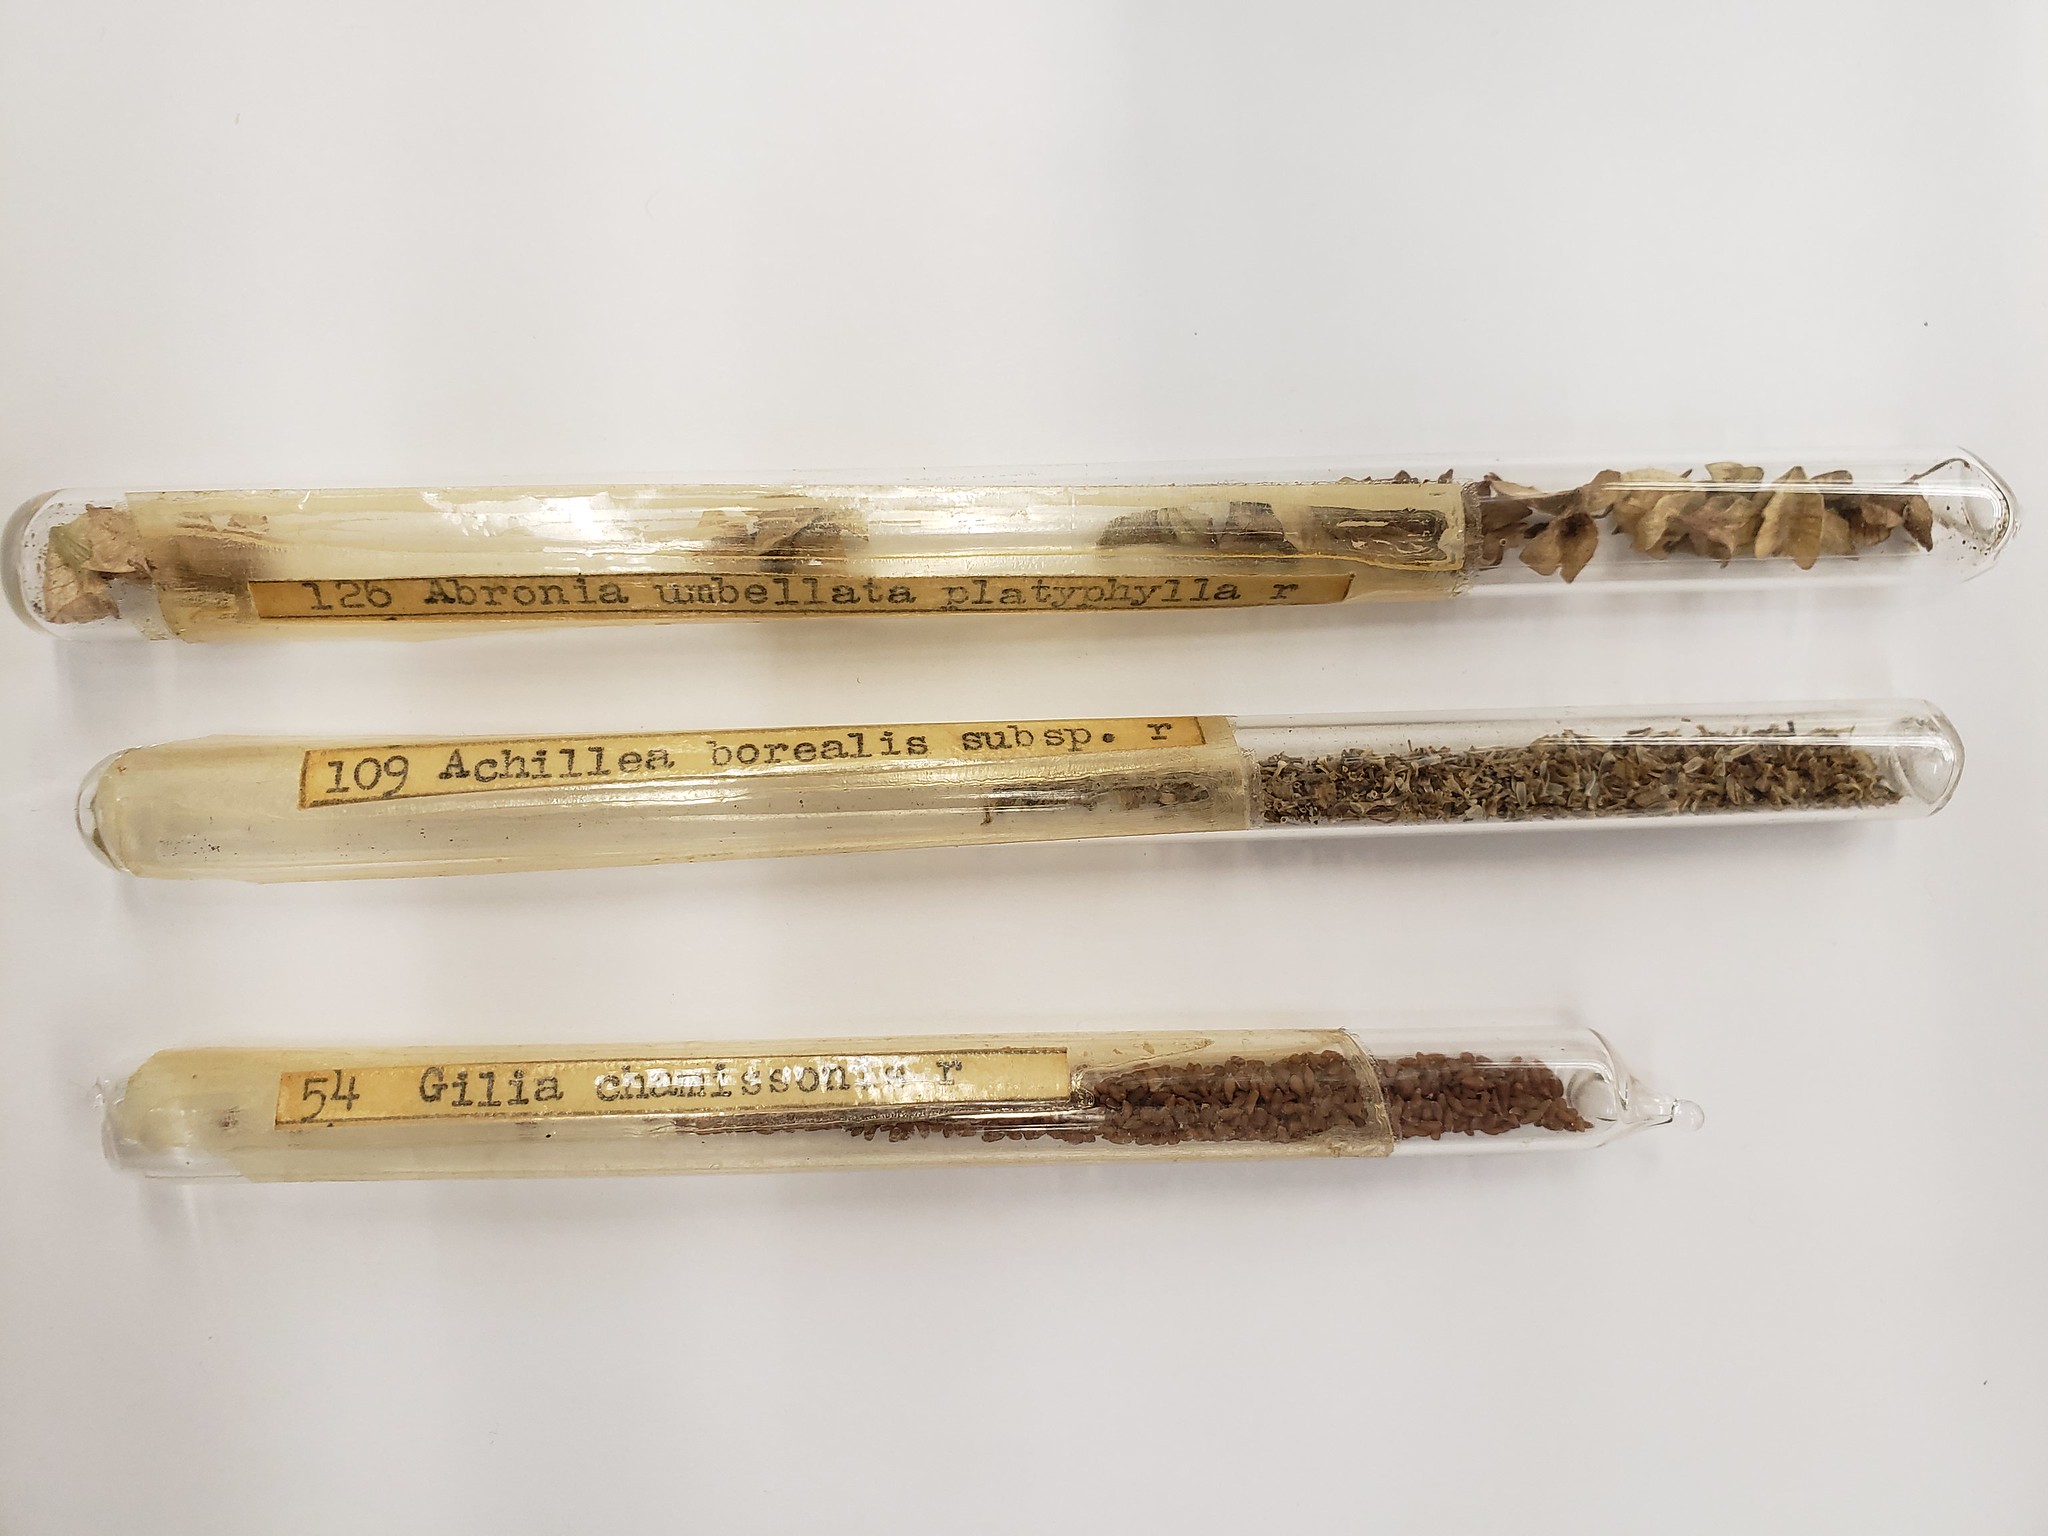 Image of seeds in tubes.